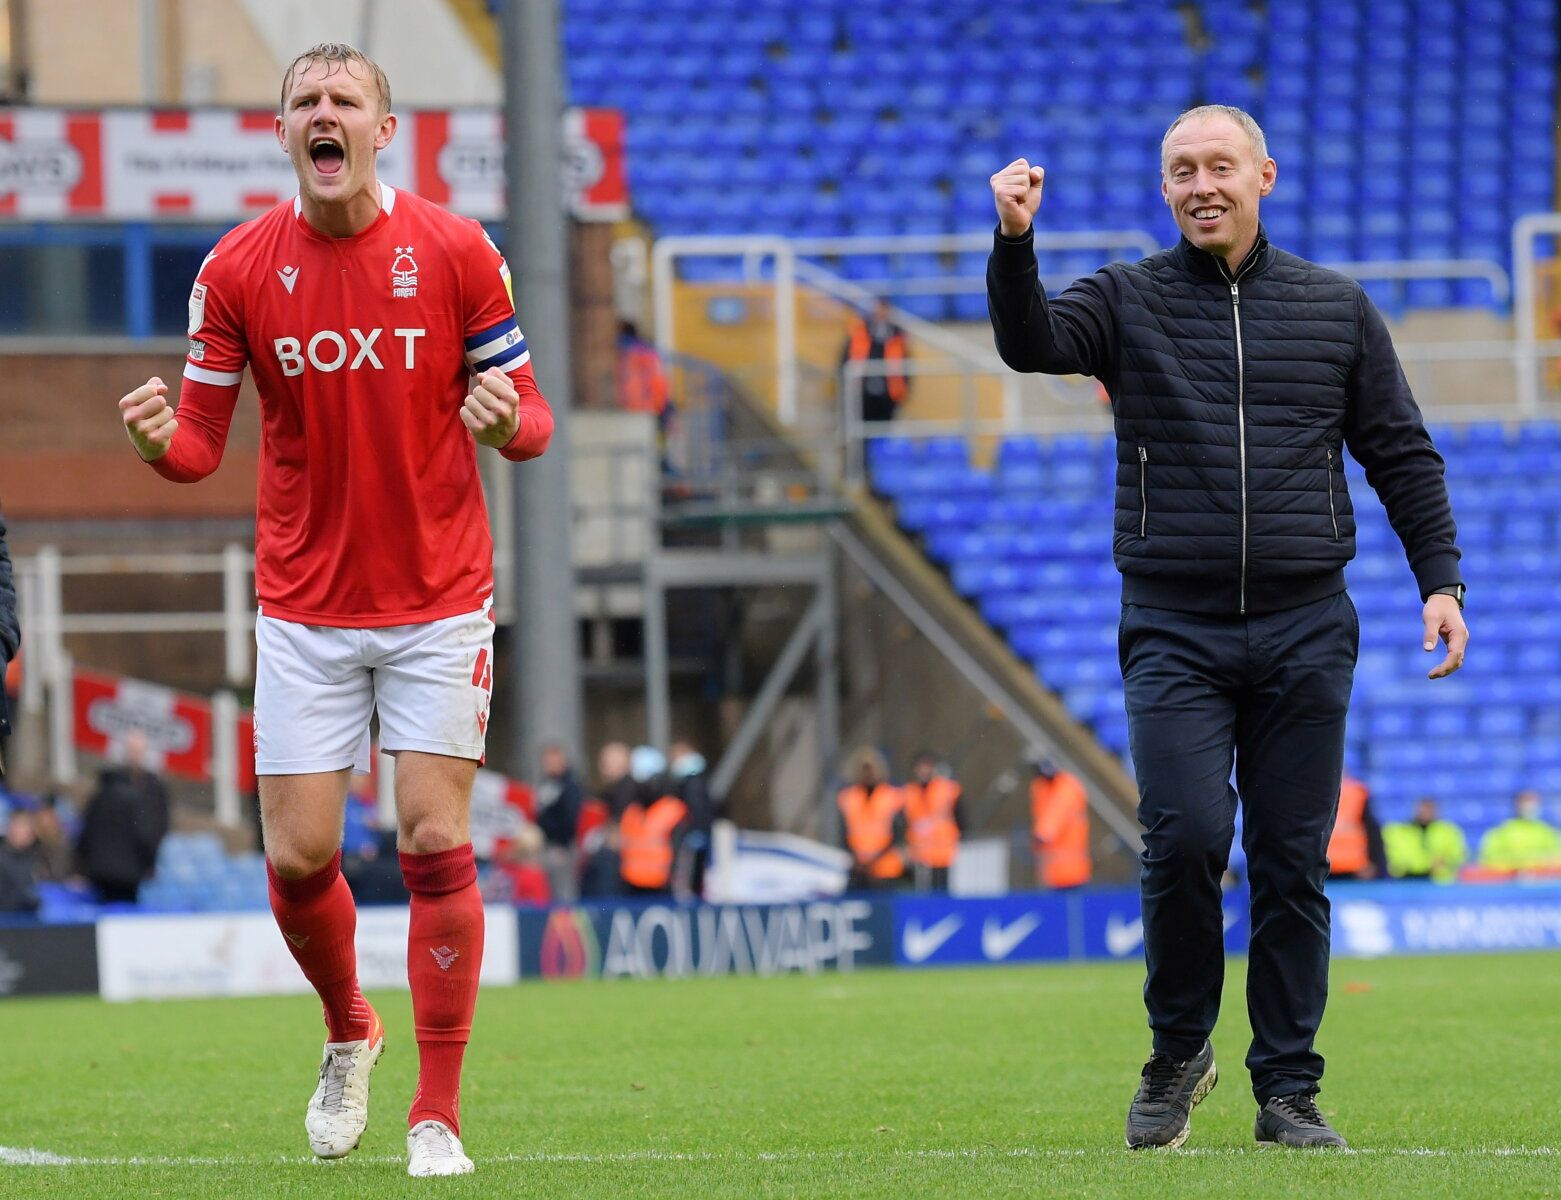 Soccer Football - Championship - Birmingham City v Nottingham Forest - St Andrew's, Birmingham, Britain - October 2, 2021  Nottingham Forest's Joe Worrall celebrates with manager Steve Cooper at full time  Action Images/Paul Burrows  EDITORIAL USE ONLY. No use with unauthorized audio, video, data, fixture lists, club/league logos or 